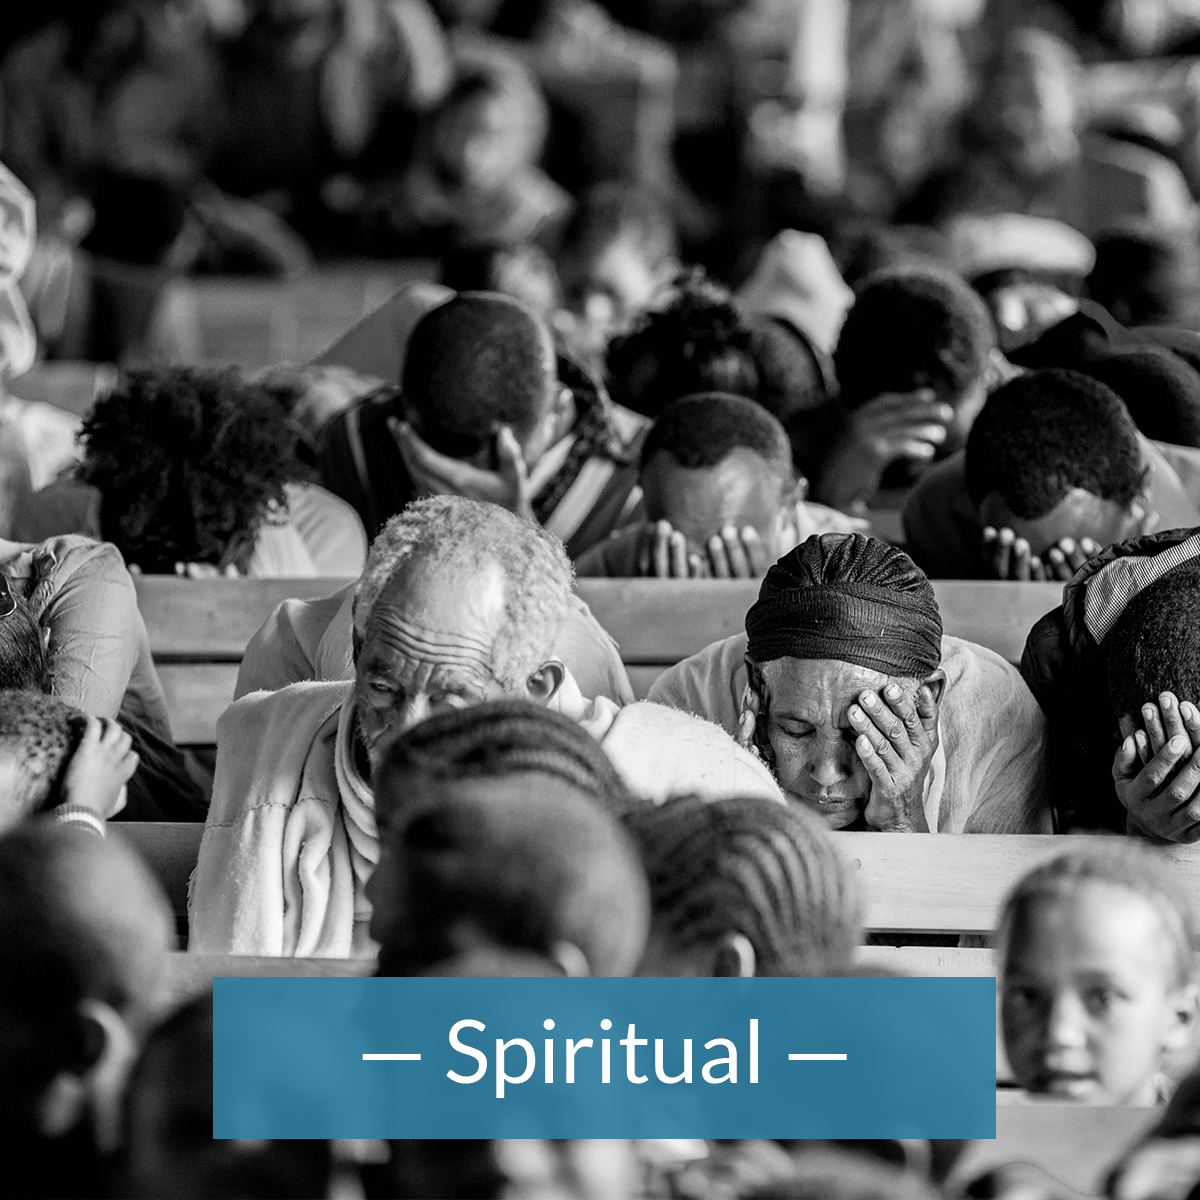 Redemptive lift effects the spiritual wellbeing of individuals in the community.